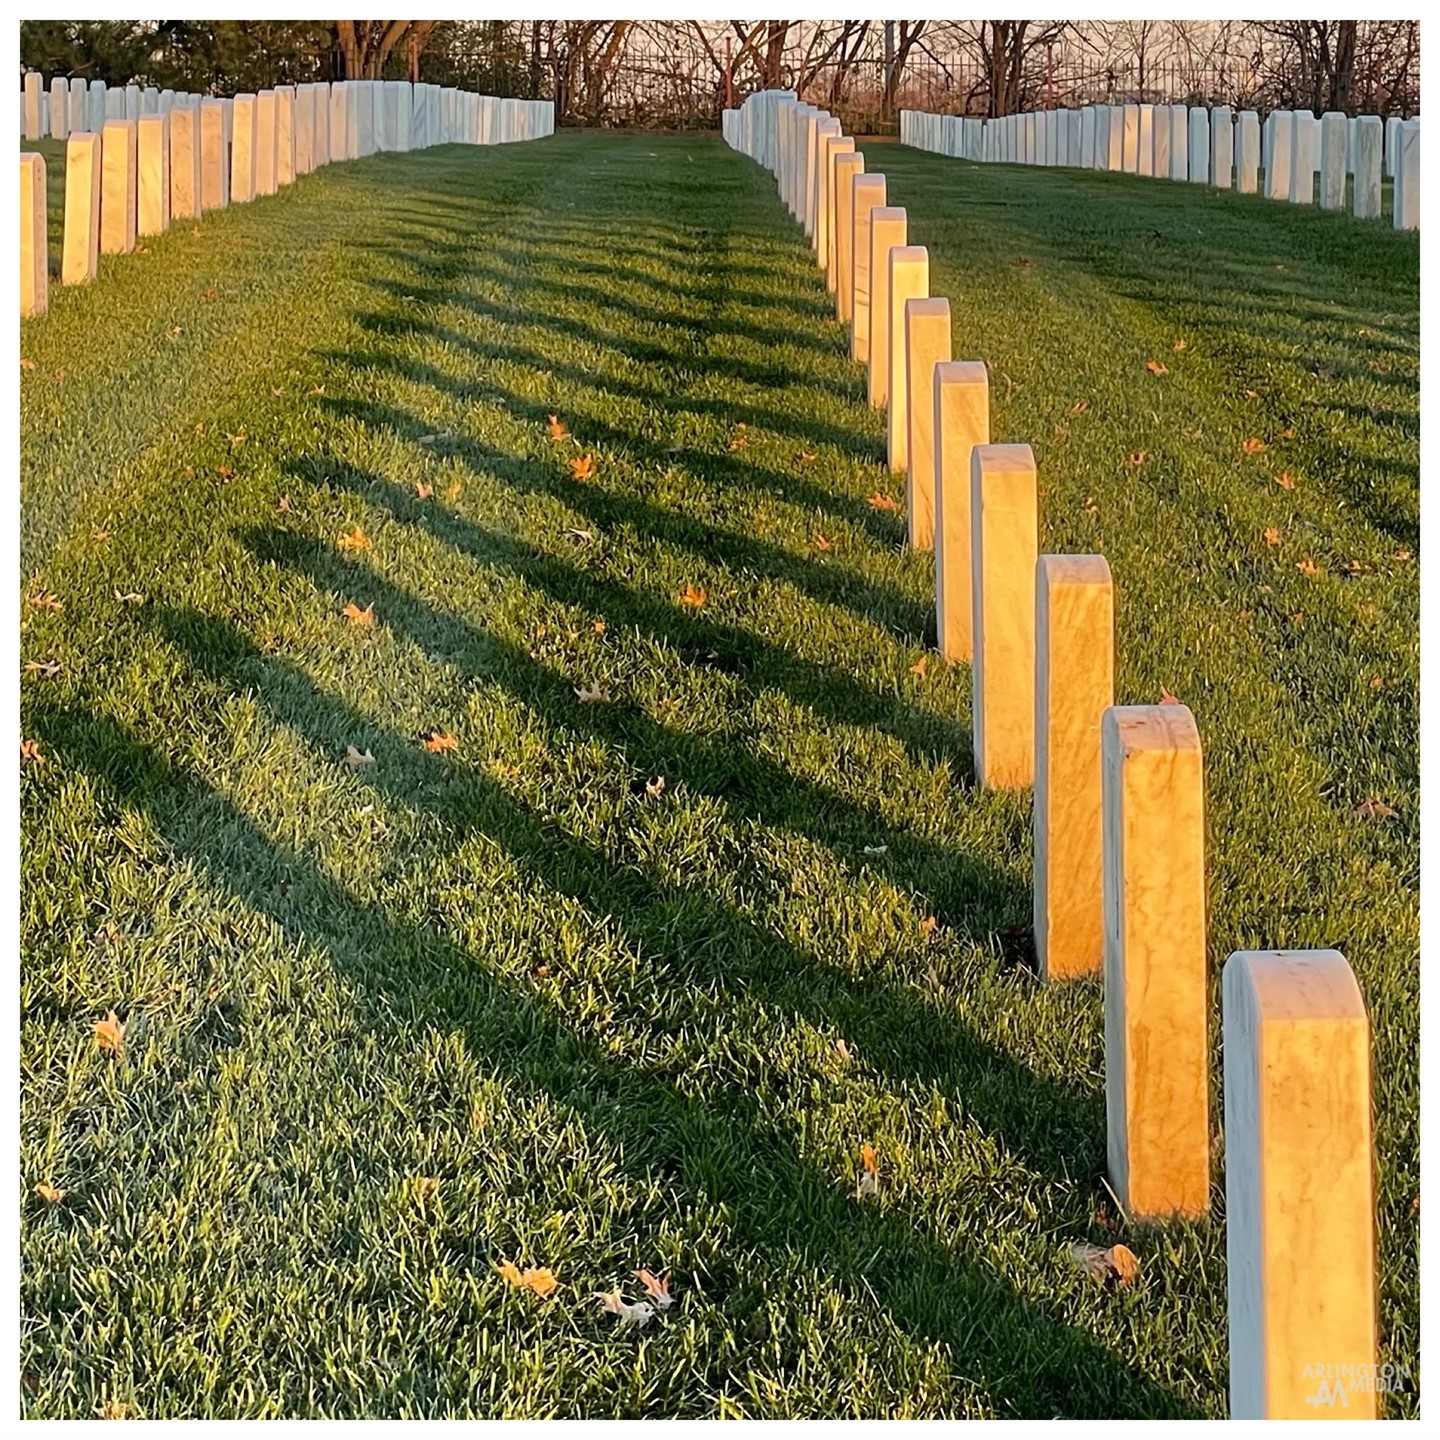 Rows of headstones in the morning sunrise captured in preparation for a full day of services covered by our team at @arlington.media

For more information on our history, work, and how we can help to capture the final mission of your loved one during their Arlington National Cemetery service, please call 1 (800) 852-7015.  It would be our honor to help guide you through this process.